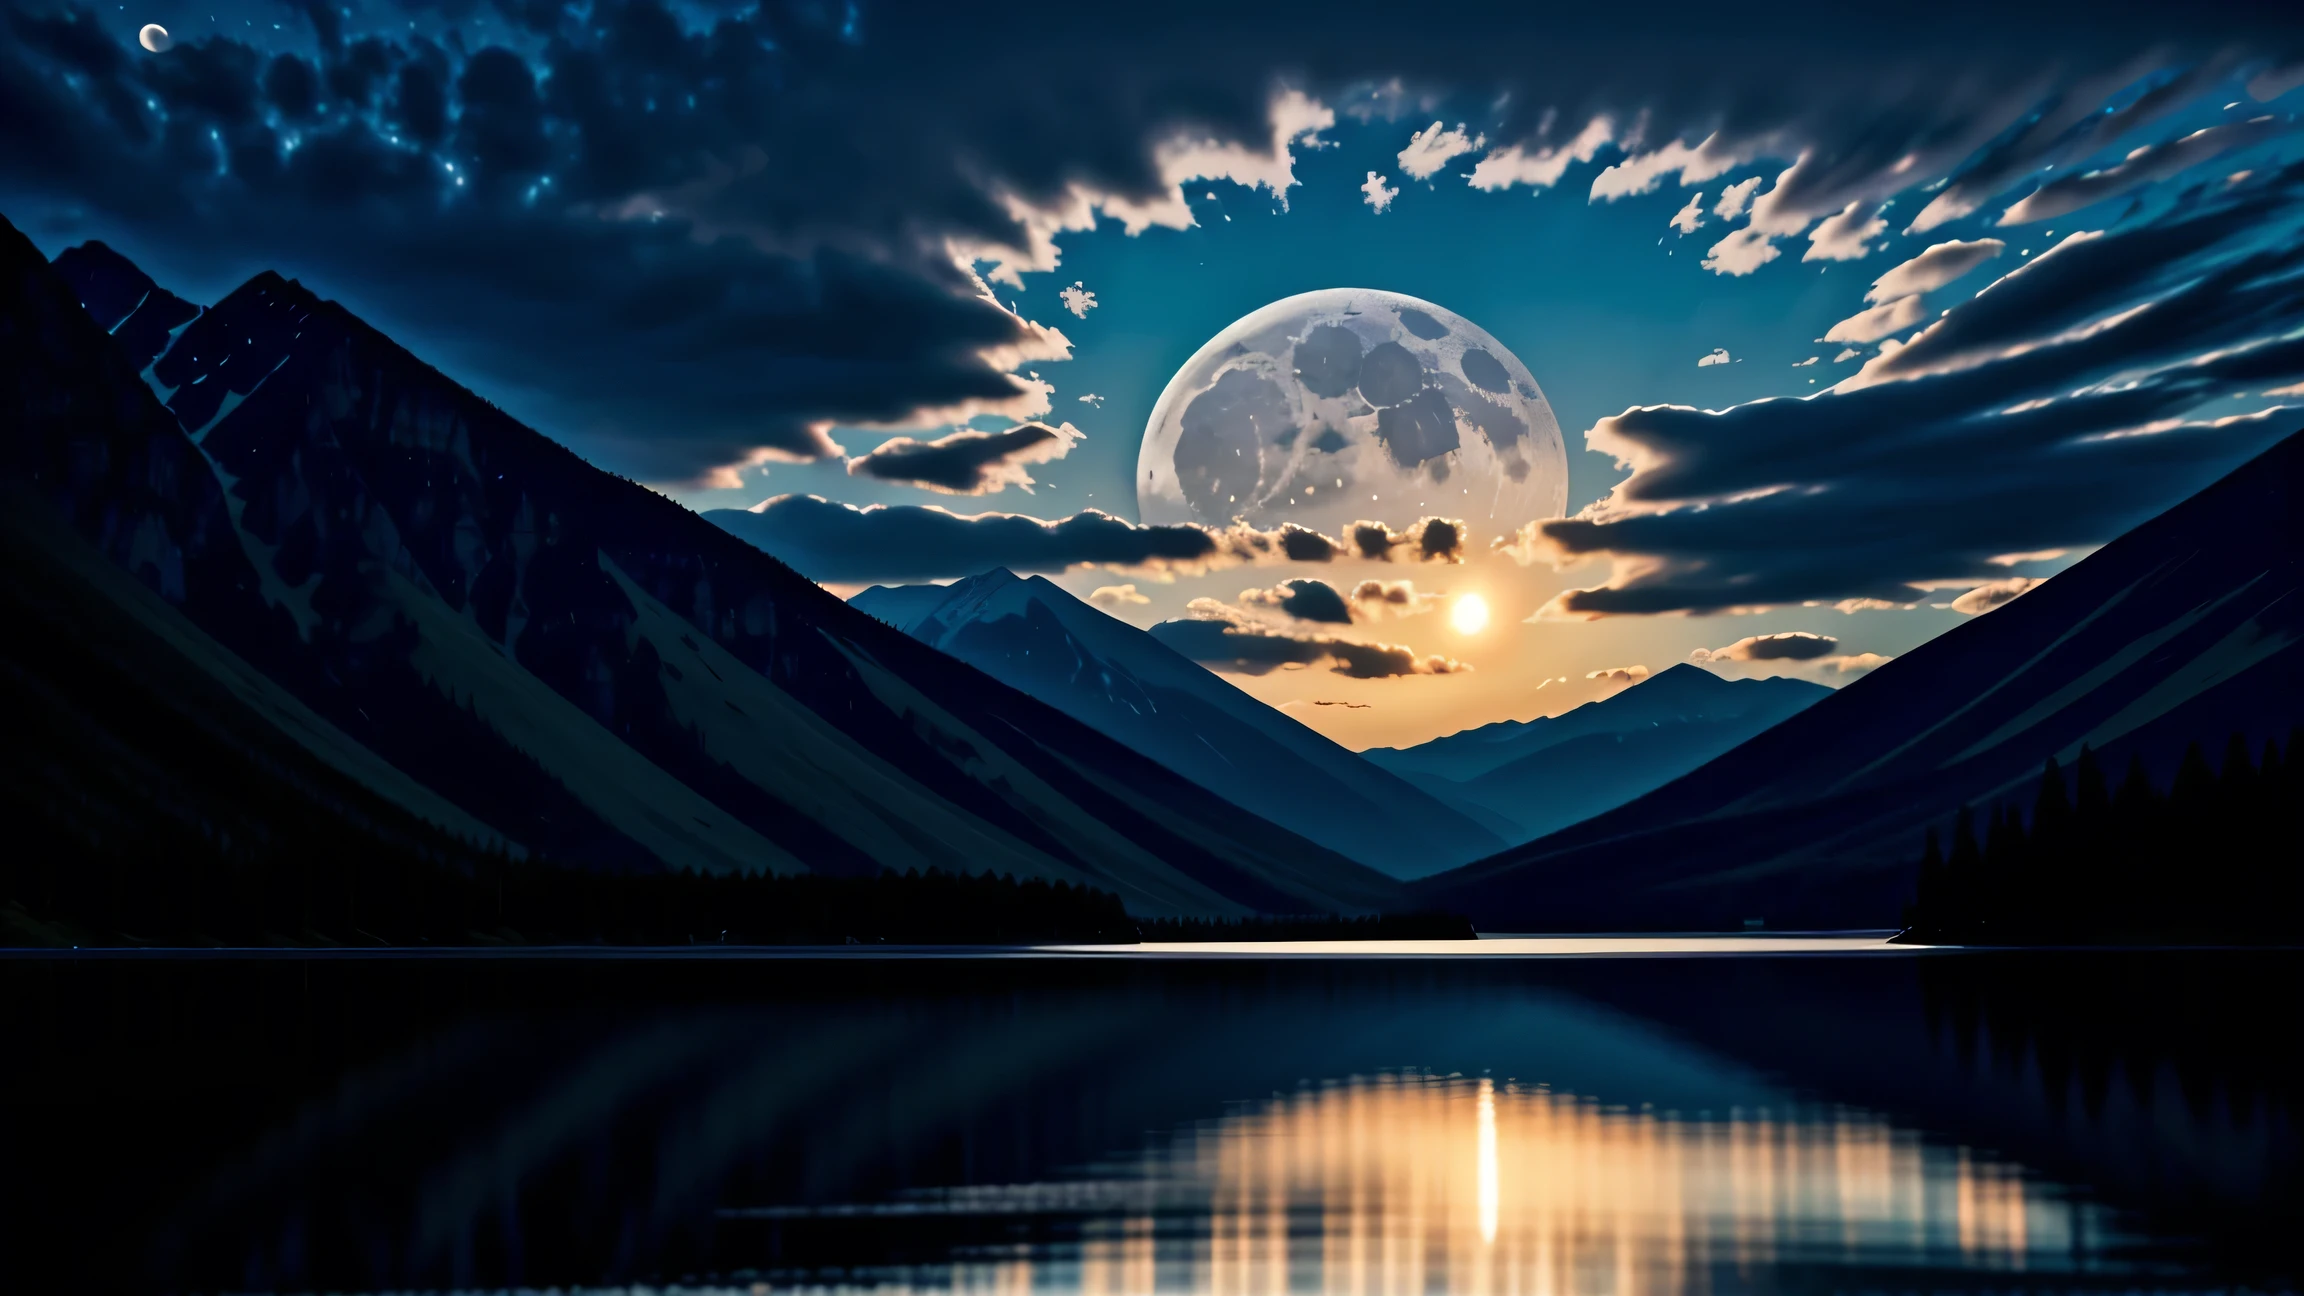 Scenic view of moon over mountains, reflecting on a tranquil lake surrounded by towering mountains